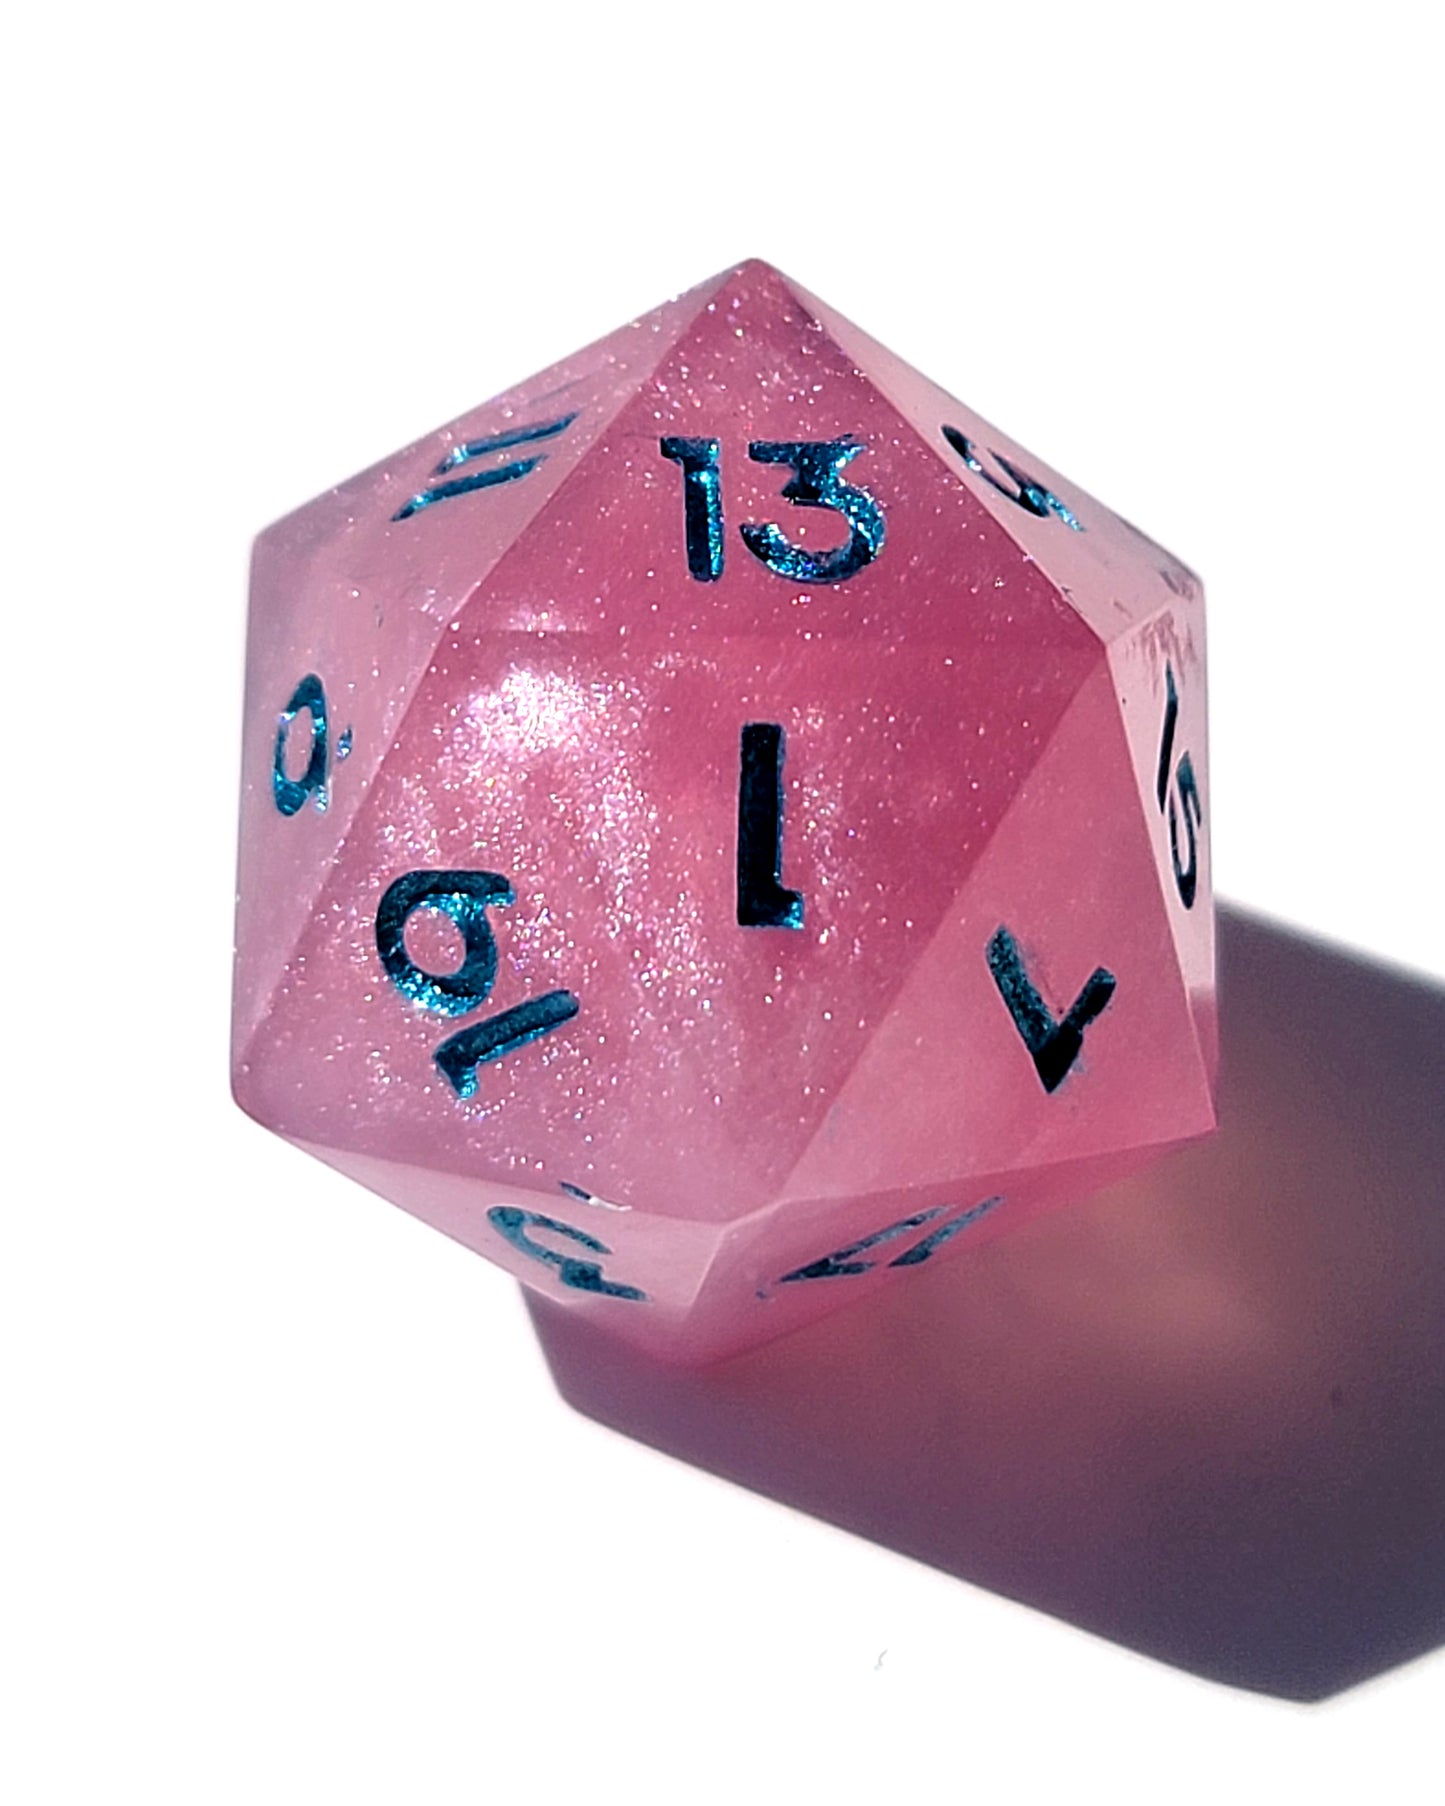 Cotton Candy delights -Single D20 | Handmade resin dice | Handcrafted D&D Dice | Handmade Dungeons and Dragons Dice